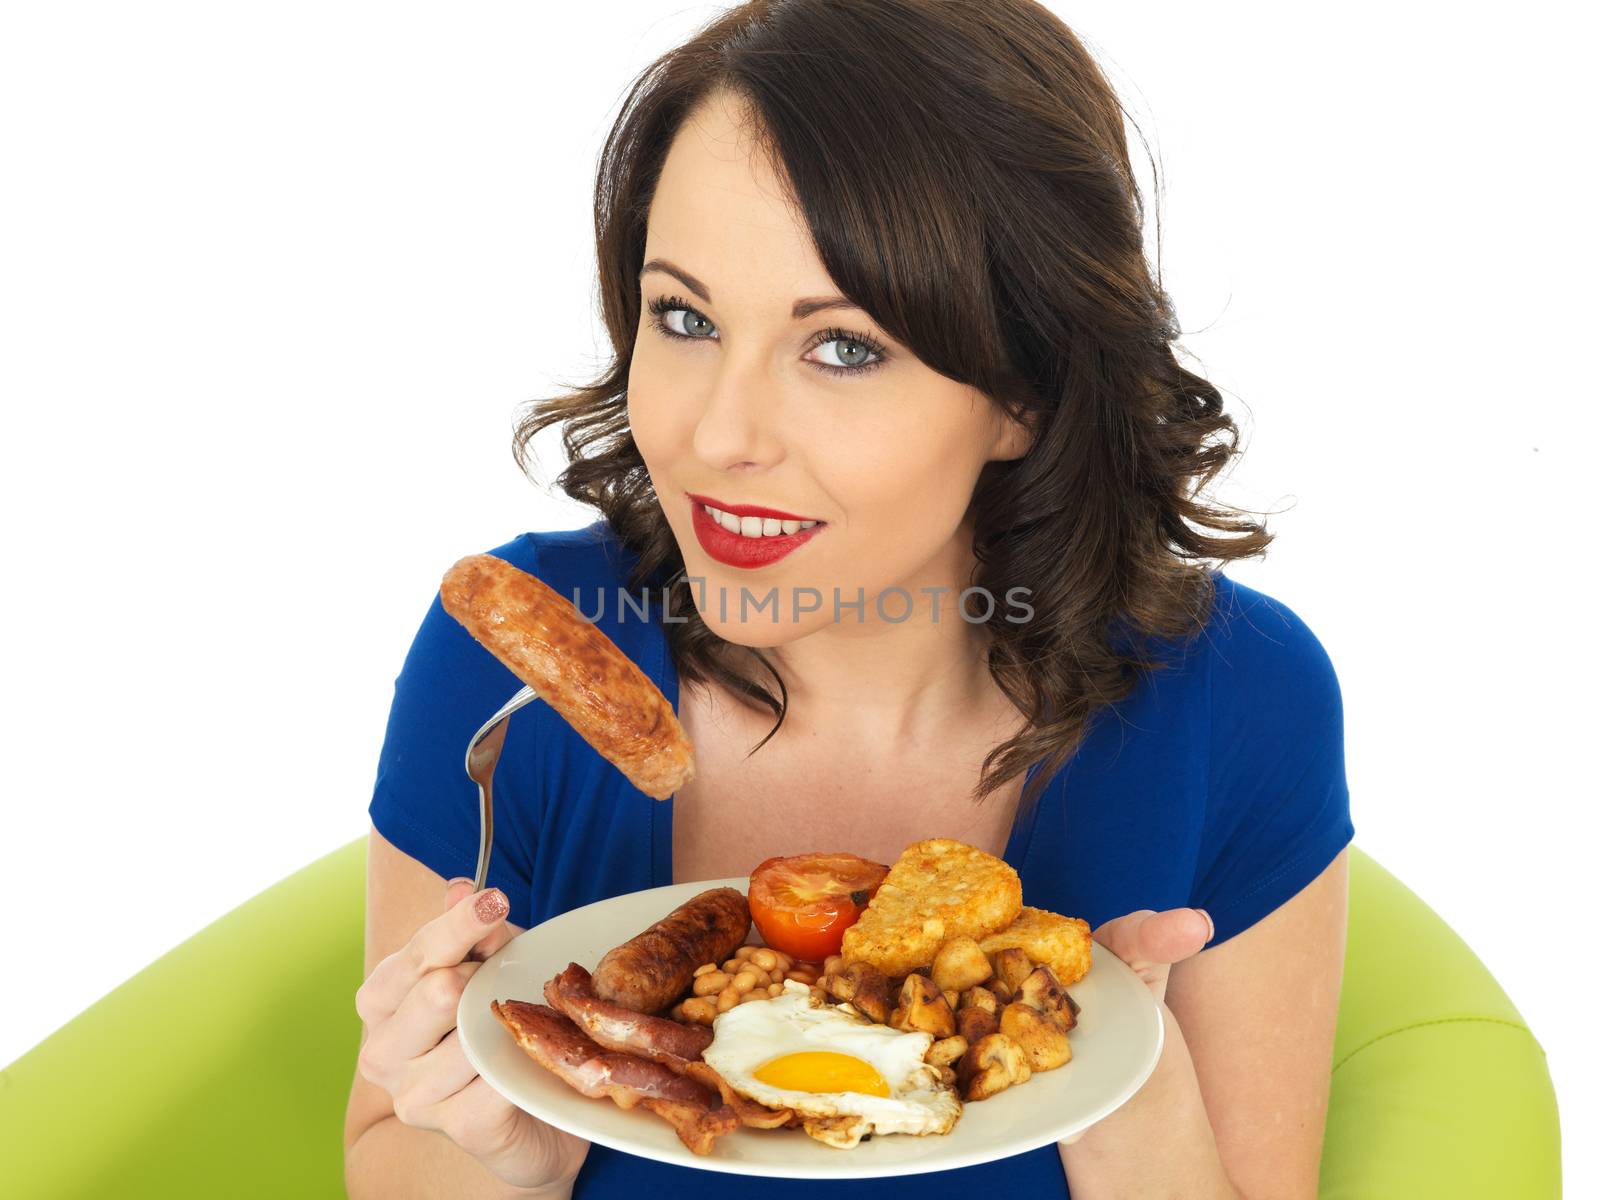 Young Woman Eating a Full English Breakfast by Whiteboxmedia